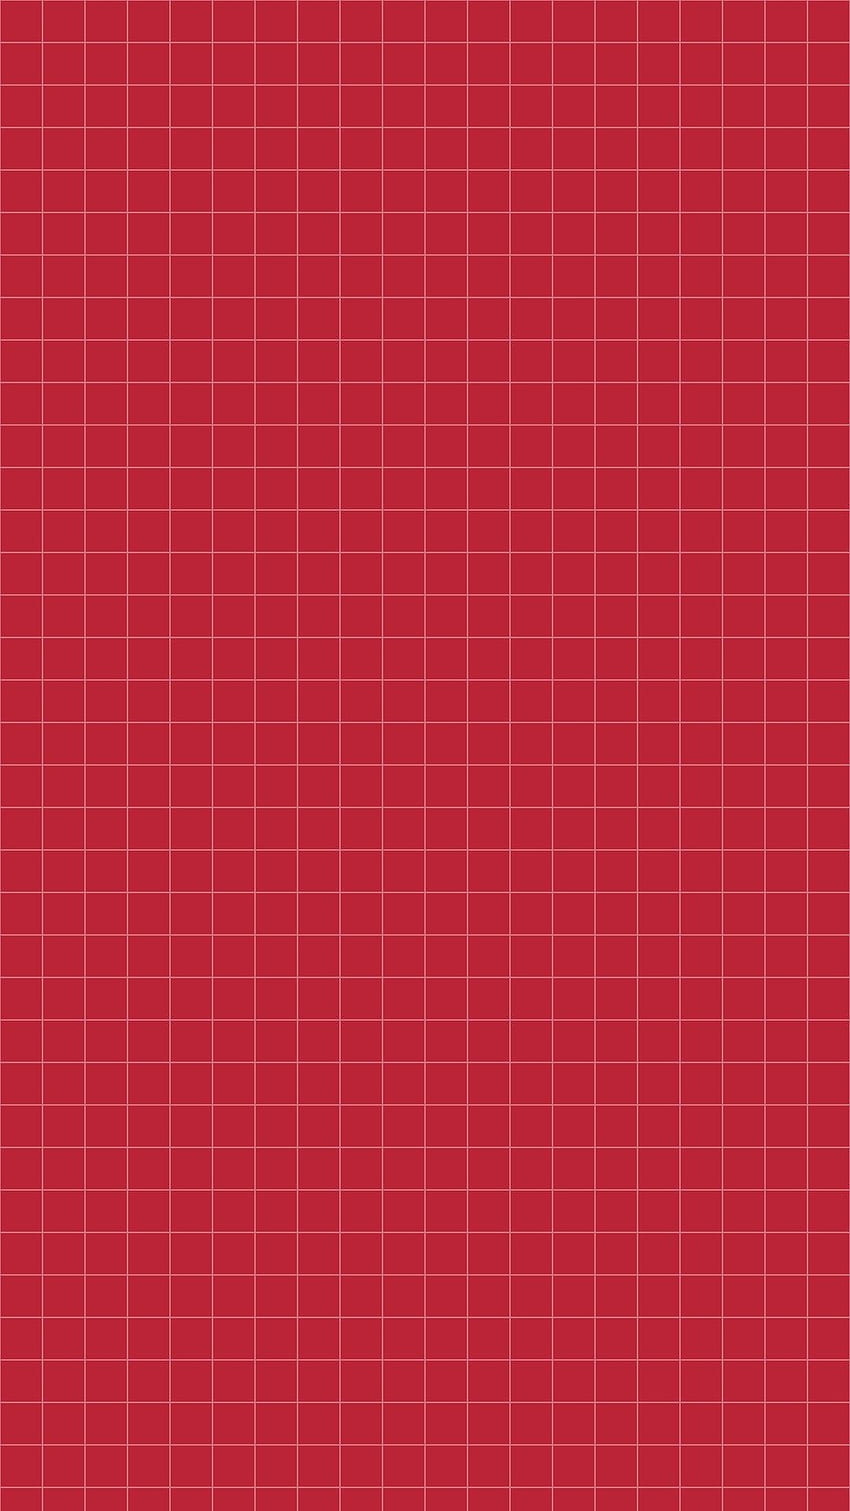 A red grid background - Grid